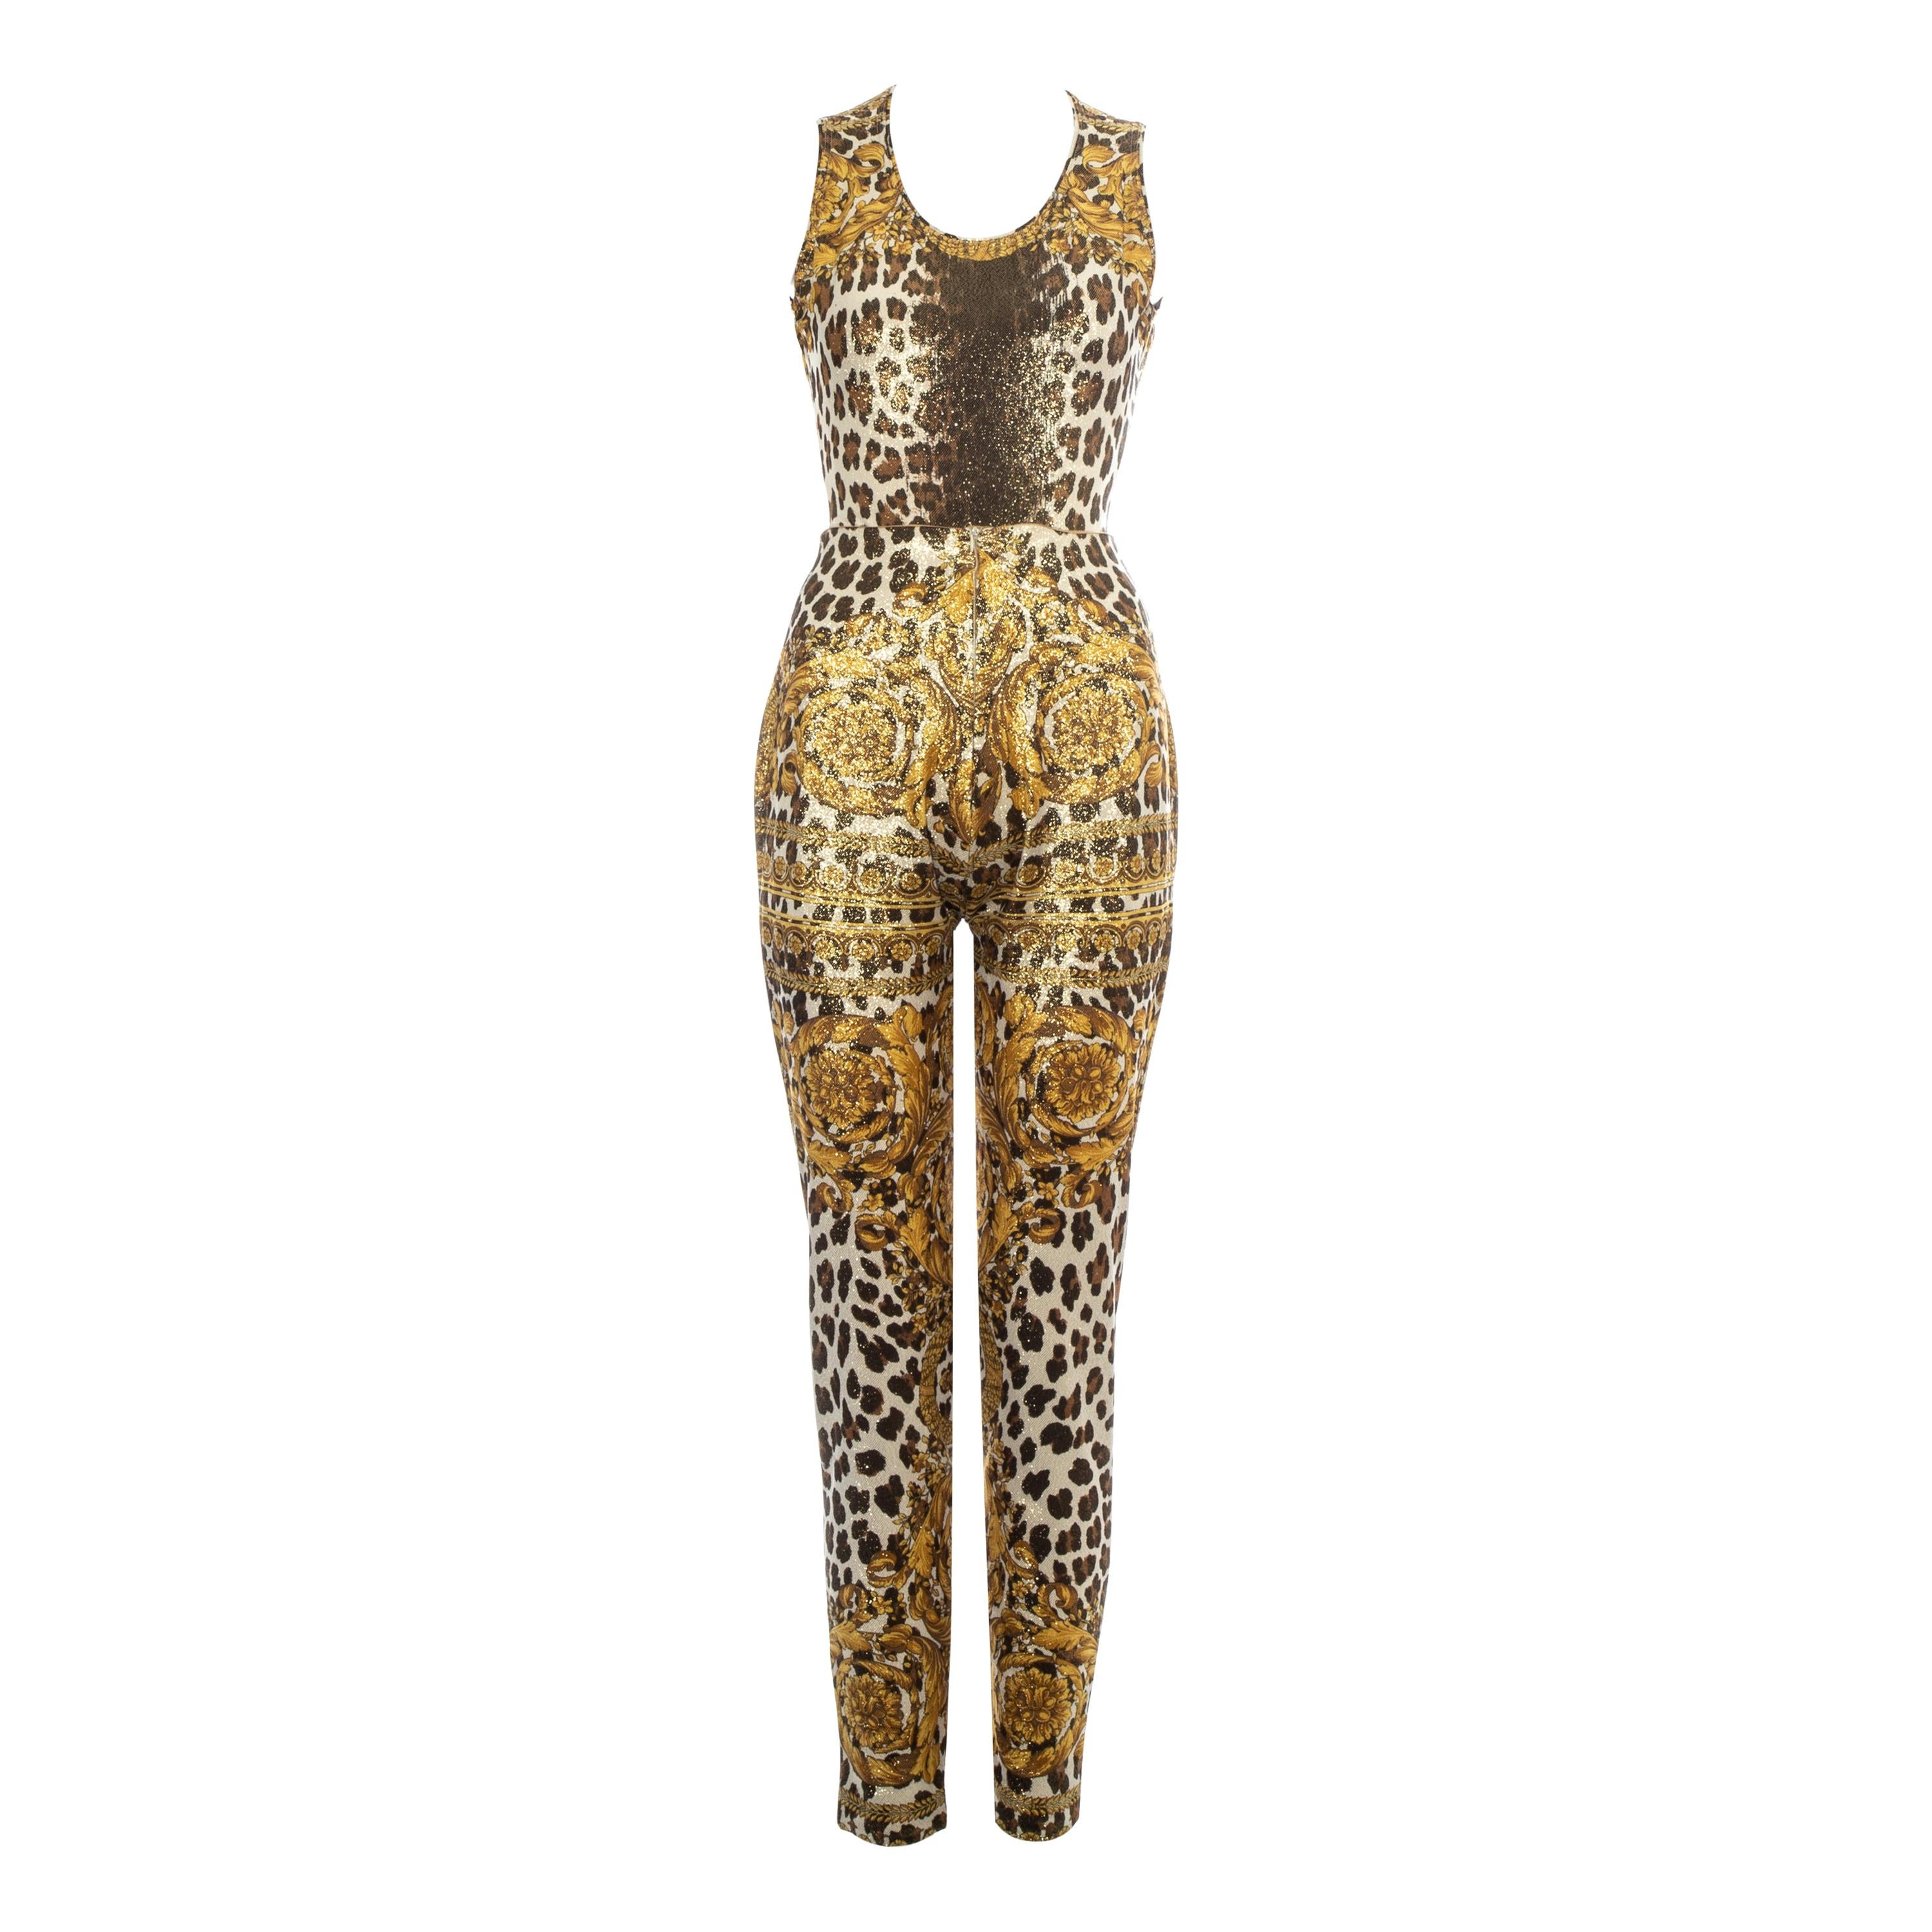 Gianni Versace gold leopard printed bodysuit and pants, ss 1992